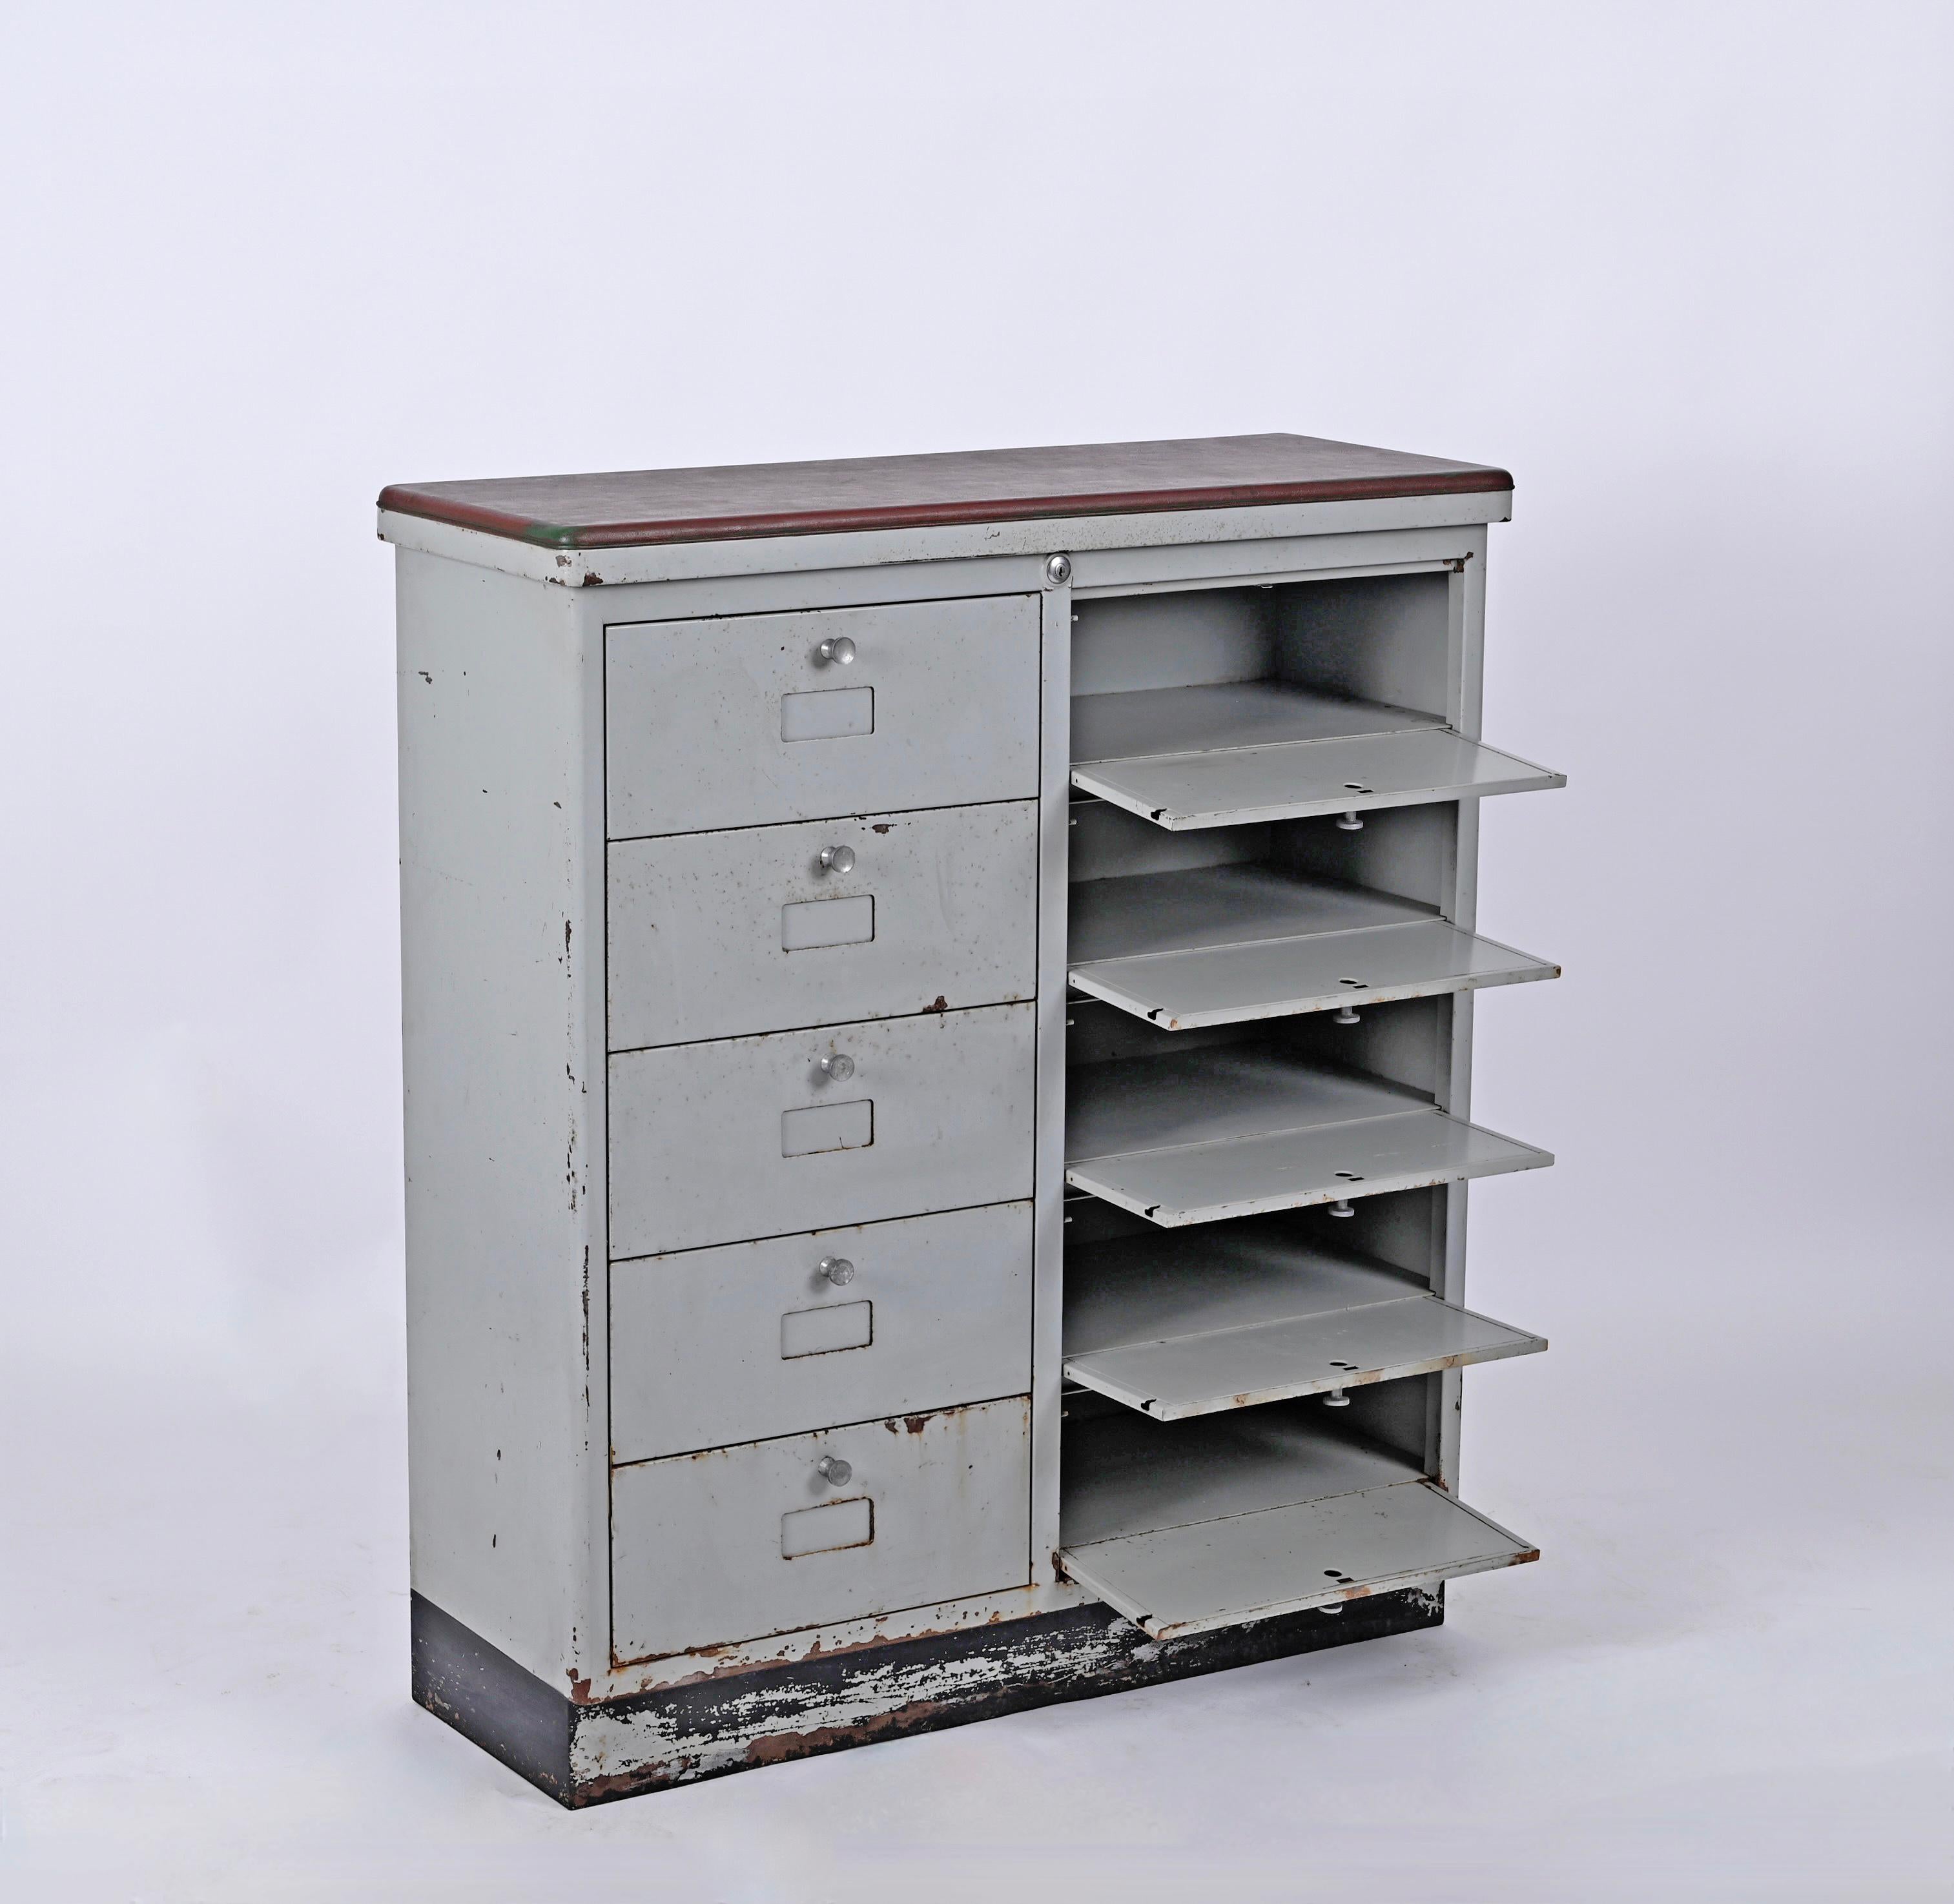 Beautiful original industrial cabinet with ten drawers, 1950s. This amazing piece was manufactured in Italy during the 1950s.

The cabinet features 10 drawers with beautiful carved knobs and a top enriched by a dark burgundy leather. 
In great